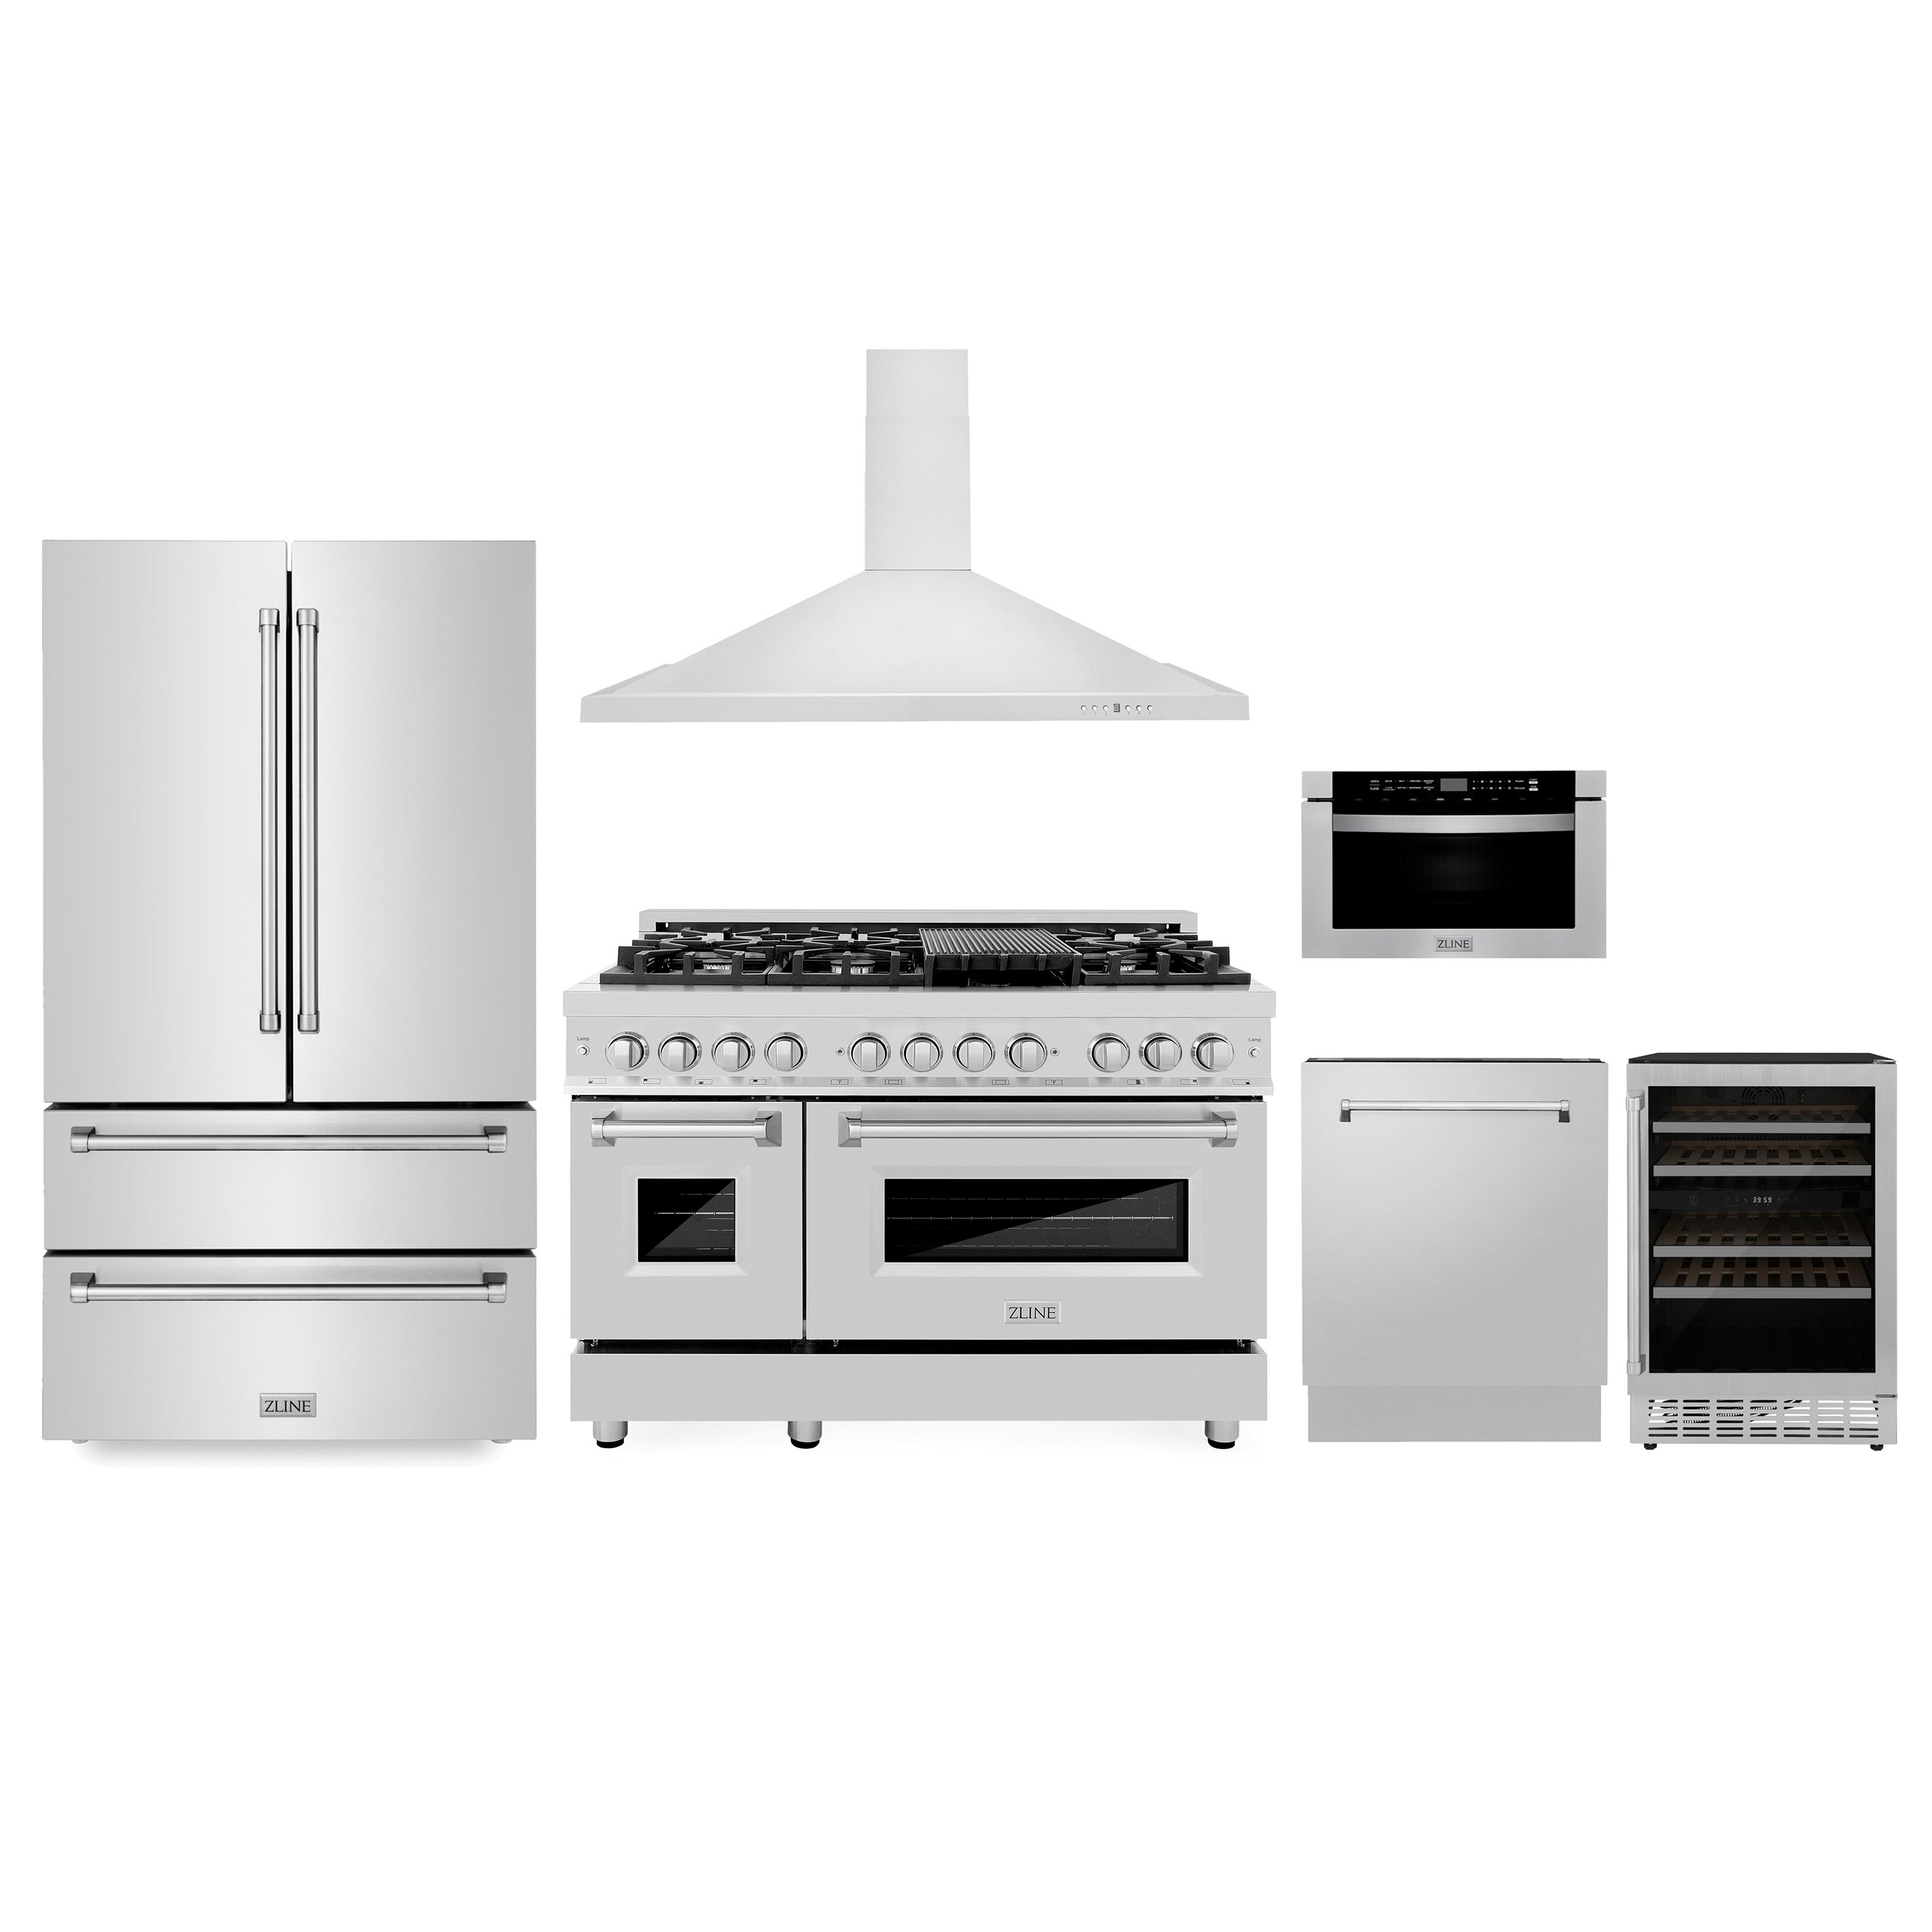  6-piece ZLINE Stainless Steel Appliance Package, featuring a 36 in. French Door Refrigerator, 48 in. Dual Fuel Range, 48 in. Range Hood, 24 in. Microwave Drawer, 24 in. Tall Tub Dishwasher, and a 24 in. Dual Zone Wine Cooler.